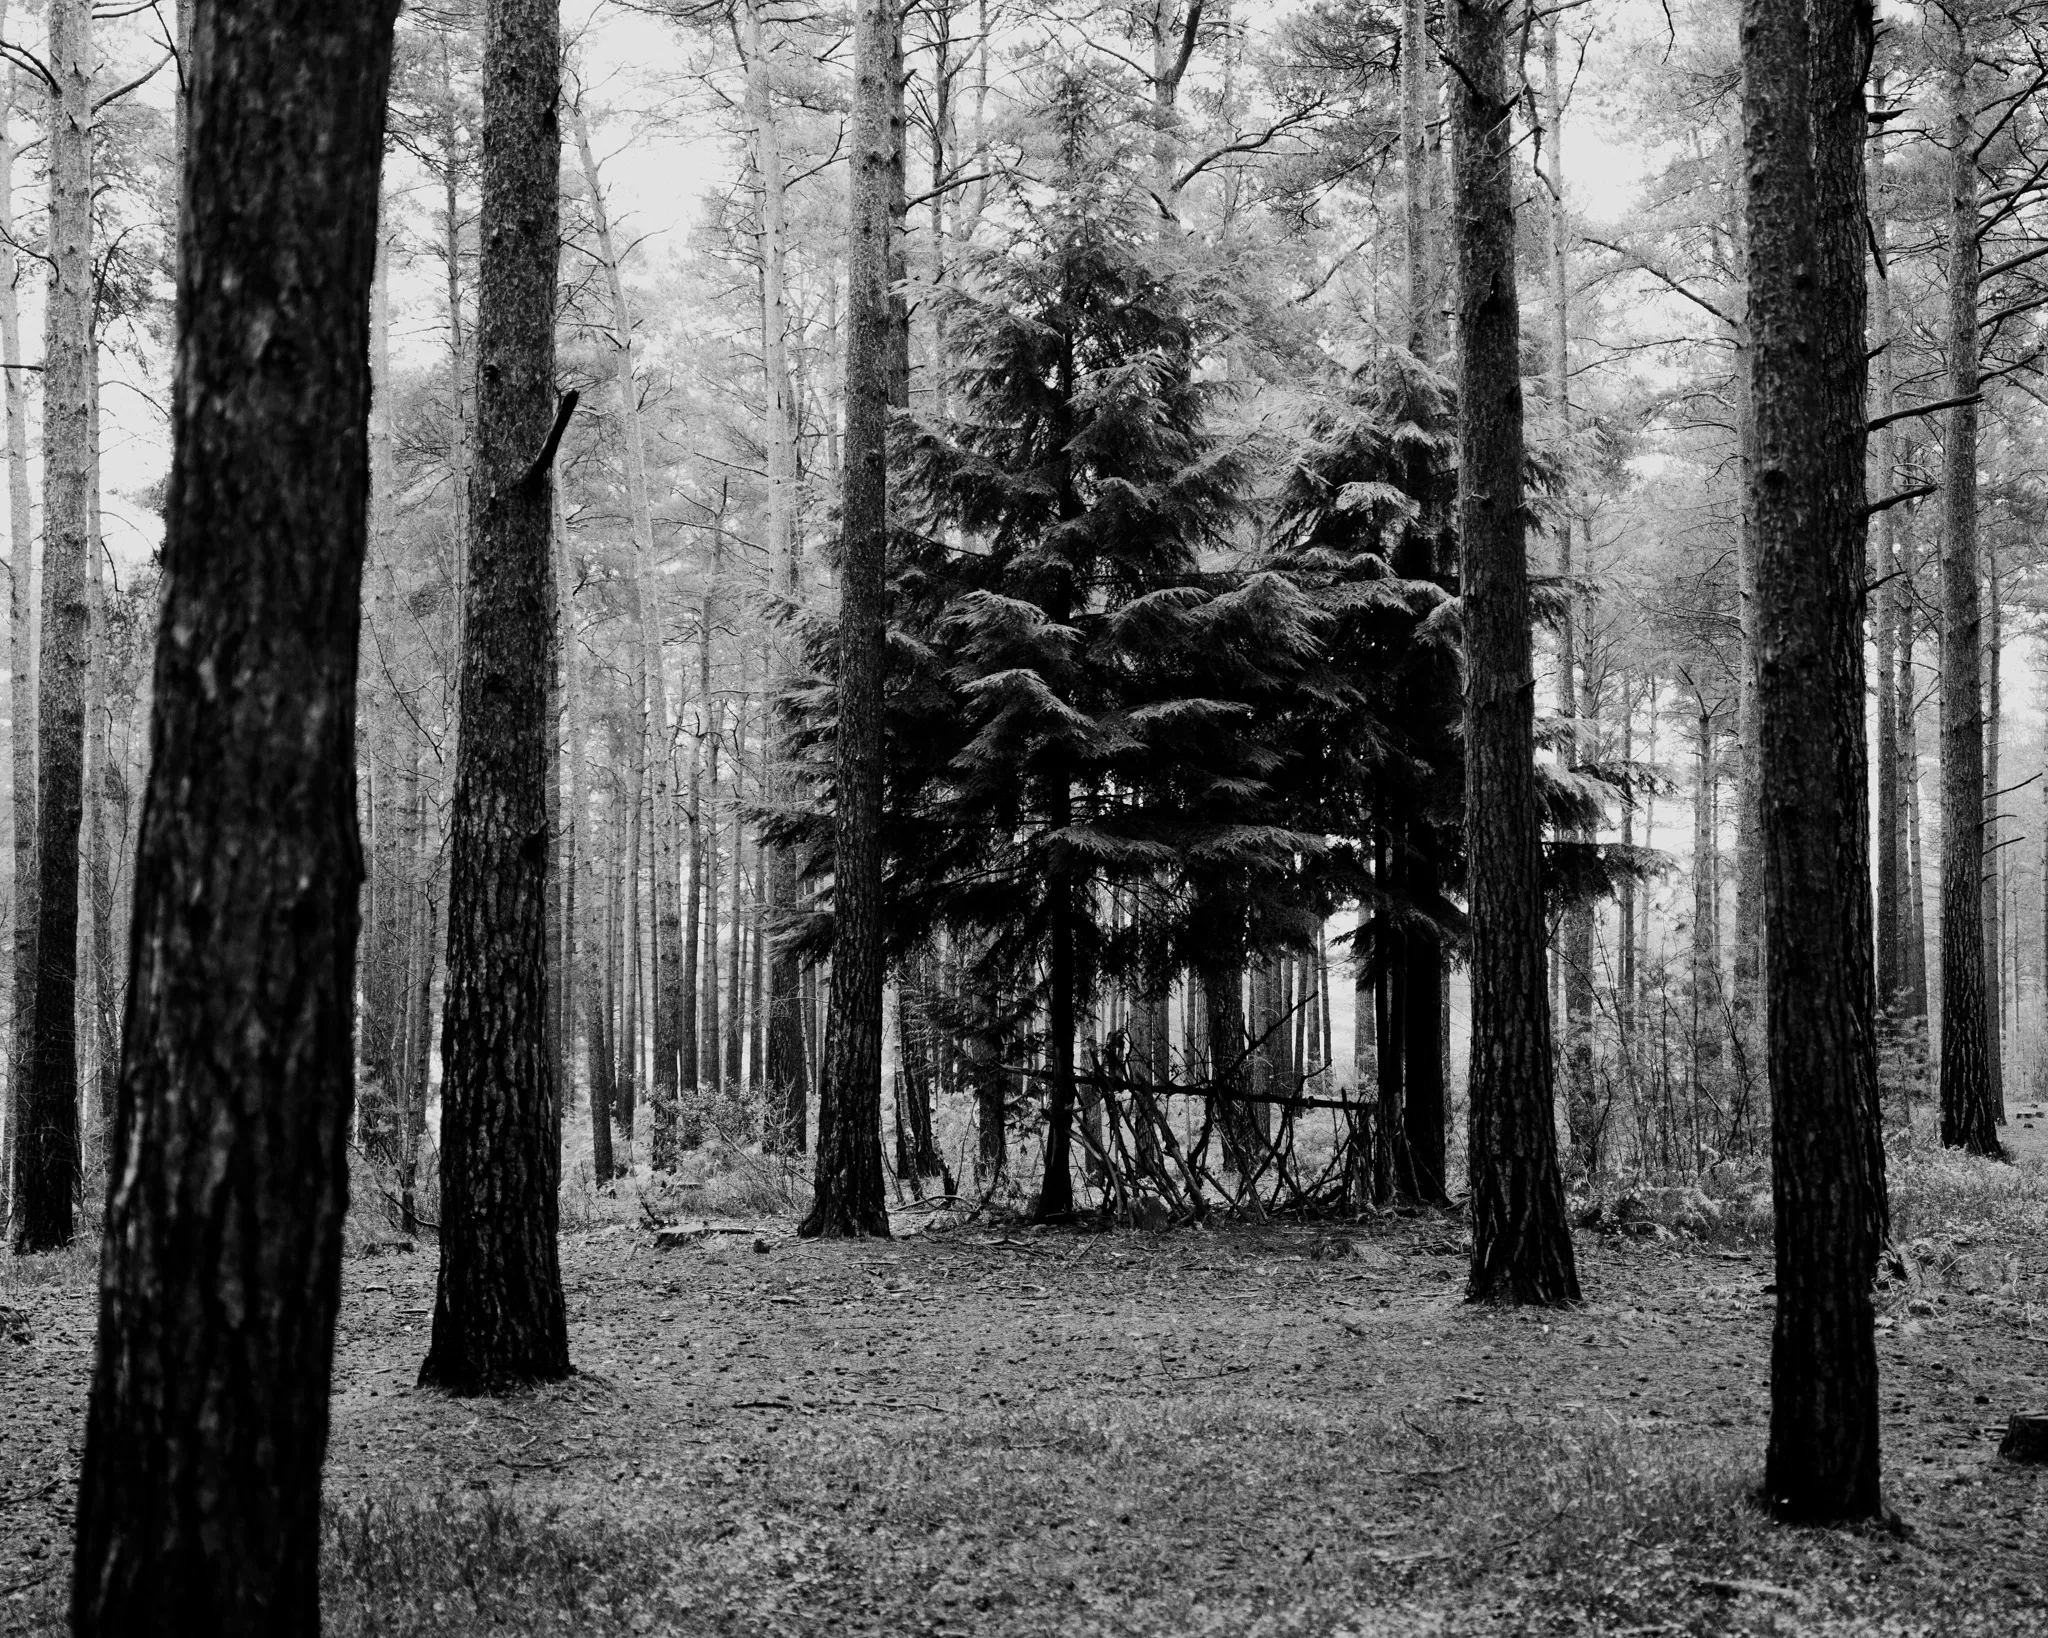 An image of two trees of a different species in a fores of pines.